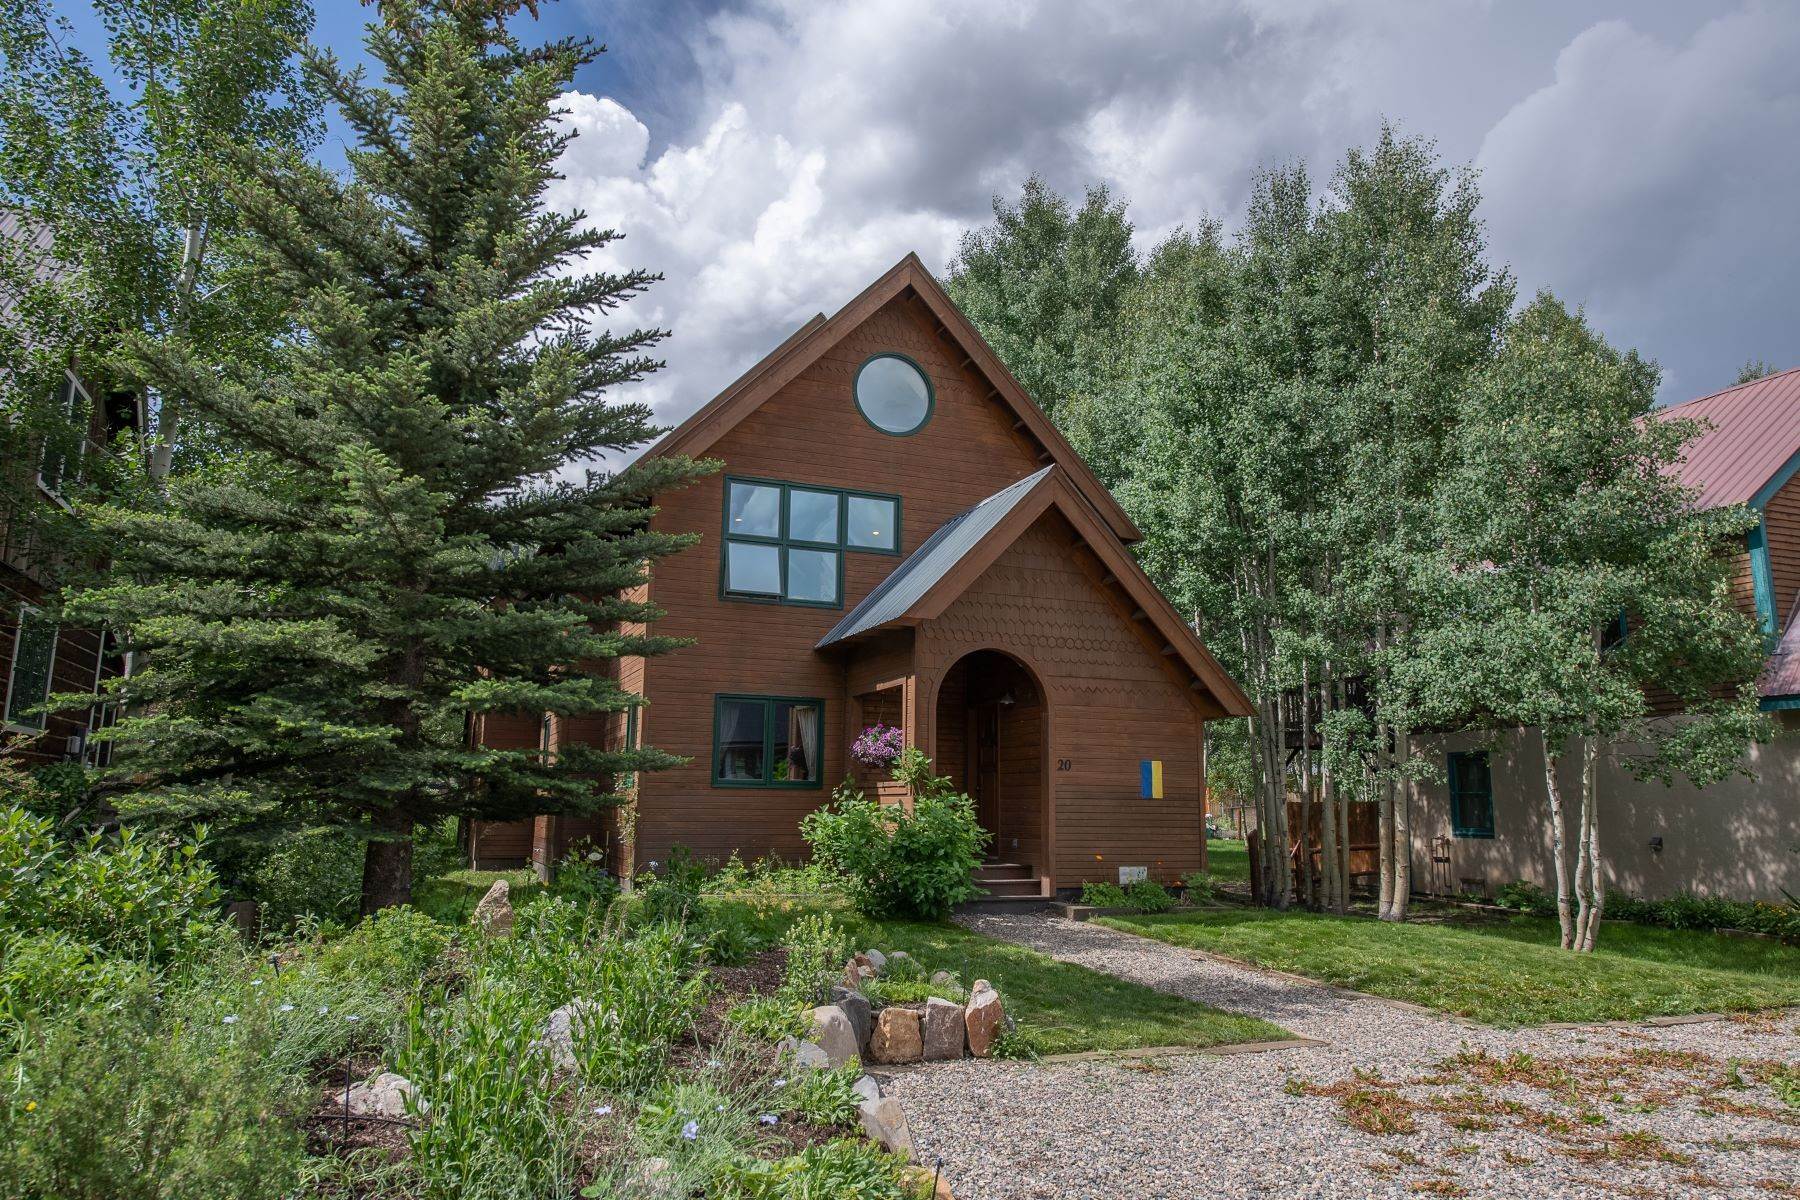 Single Family Homes for Active at Quintessential Crested Butte home 20 Butte Avenue Crested Butte, Colorado 81224 United States